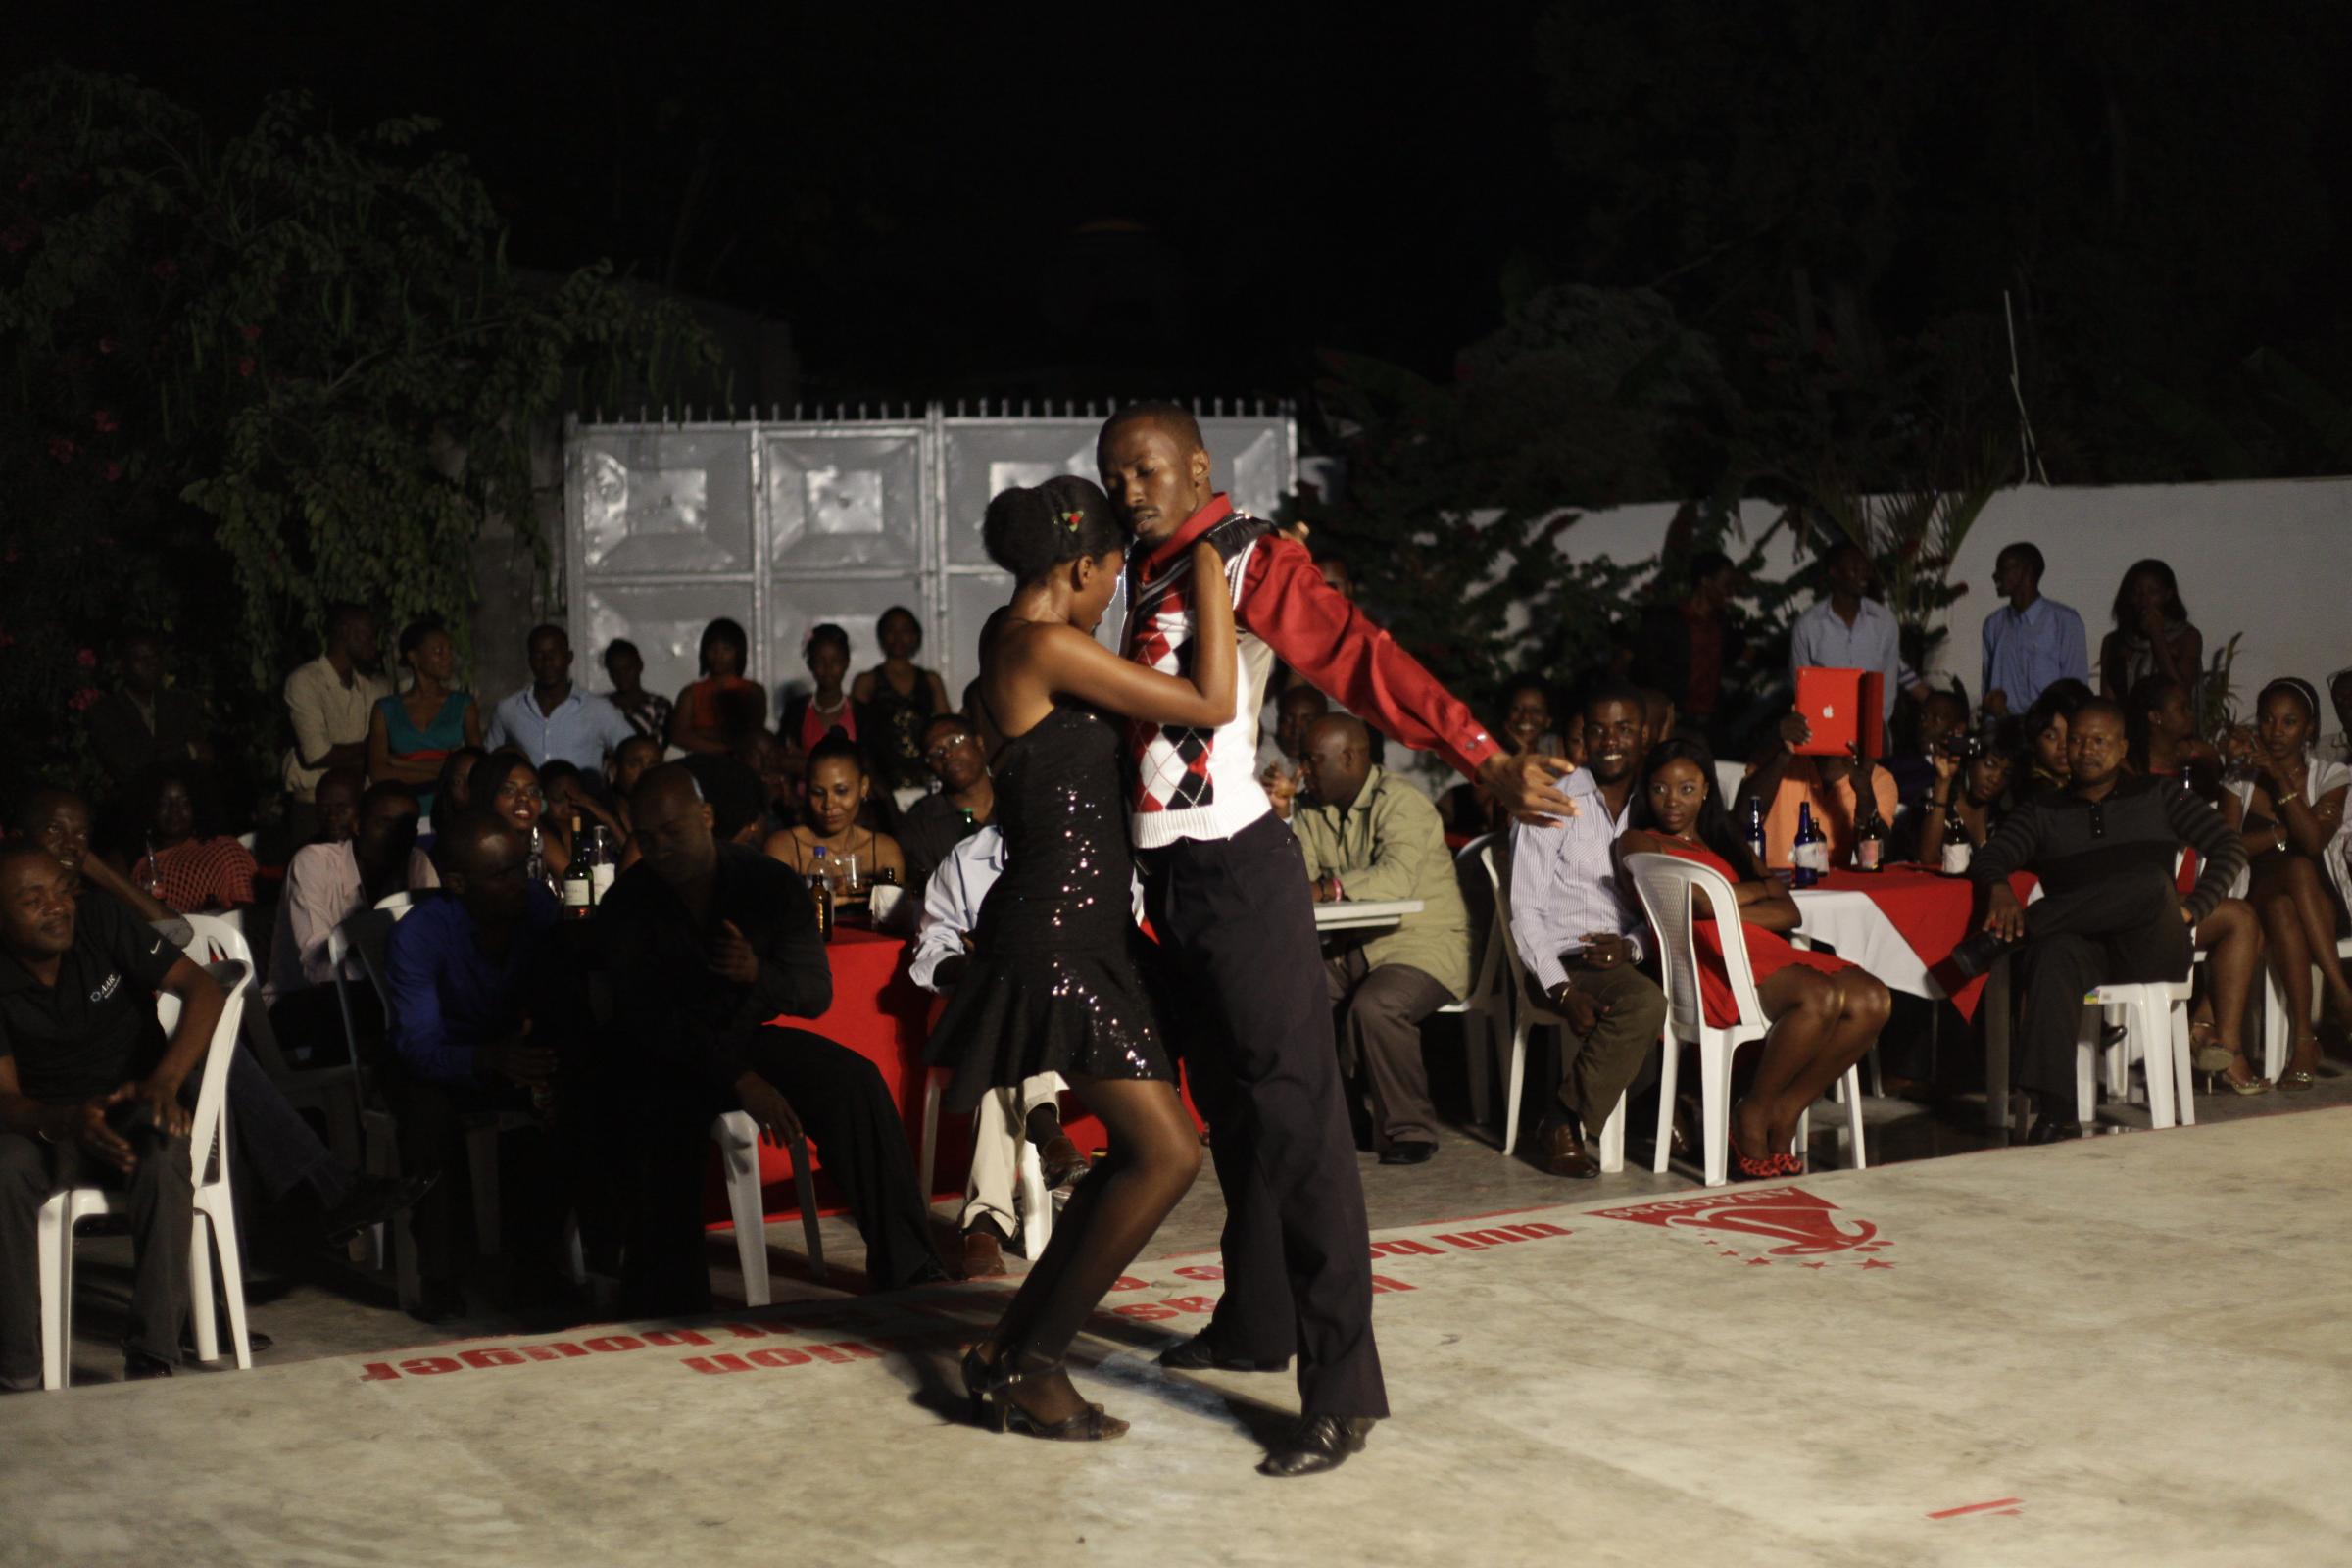 Haitian amputee makes comeback on dance floor - In this Jan. 20, 2013 photo, a professional dancer dances...